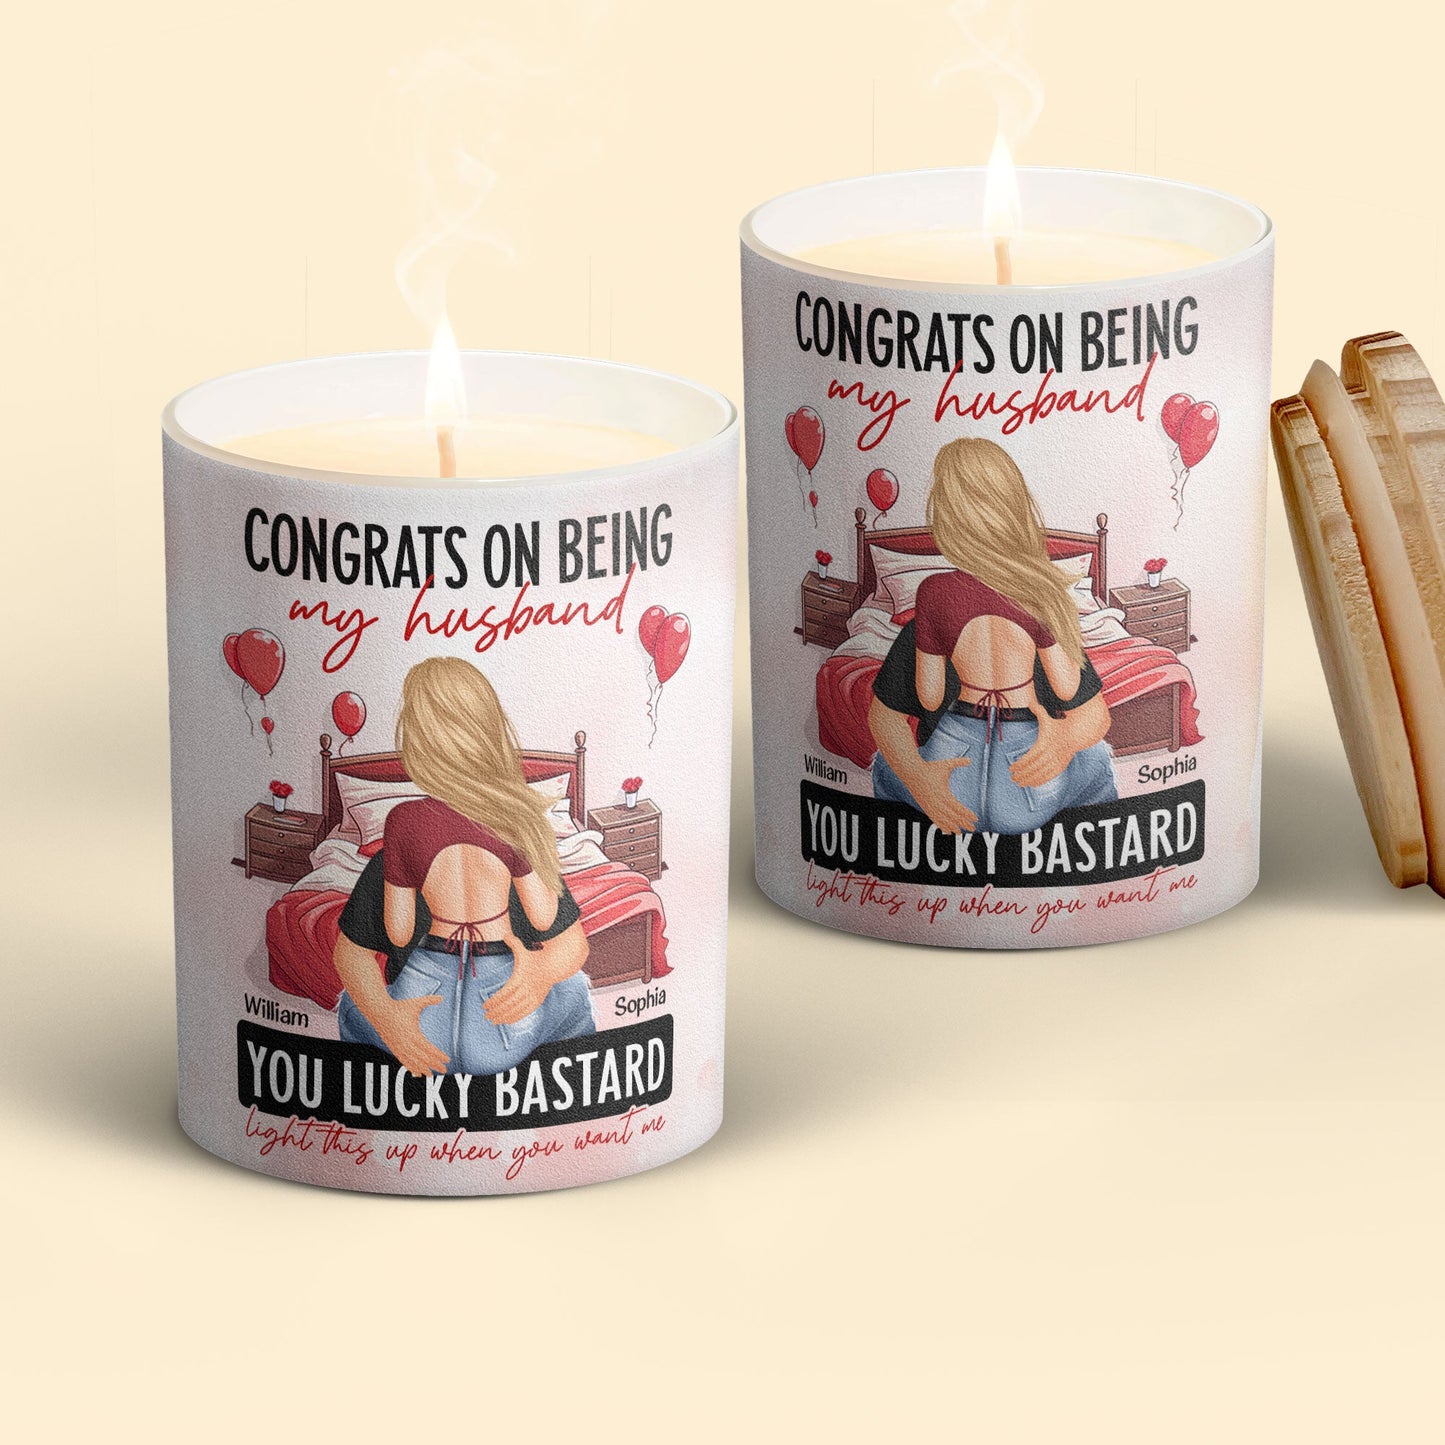 Congrats On Being My Husband - Personalized Candle